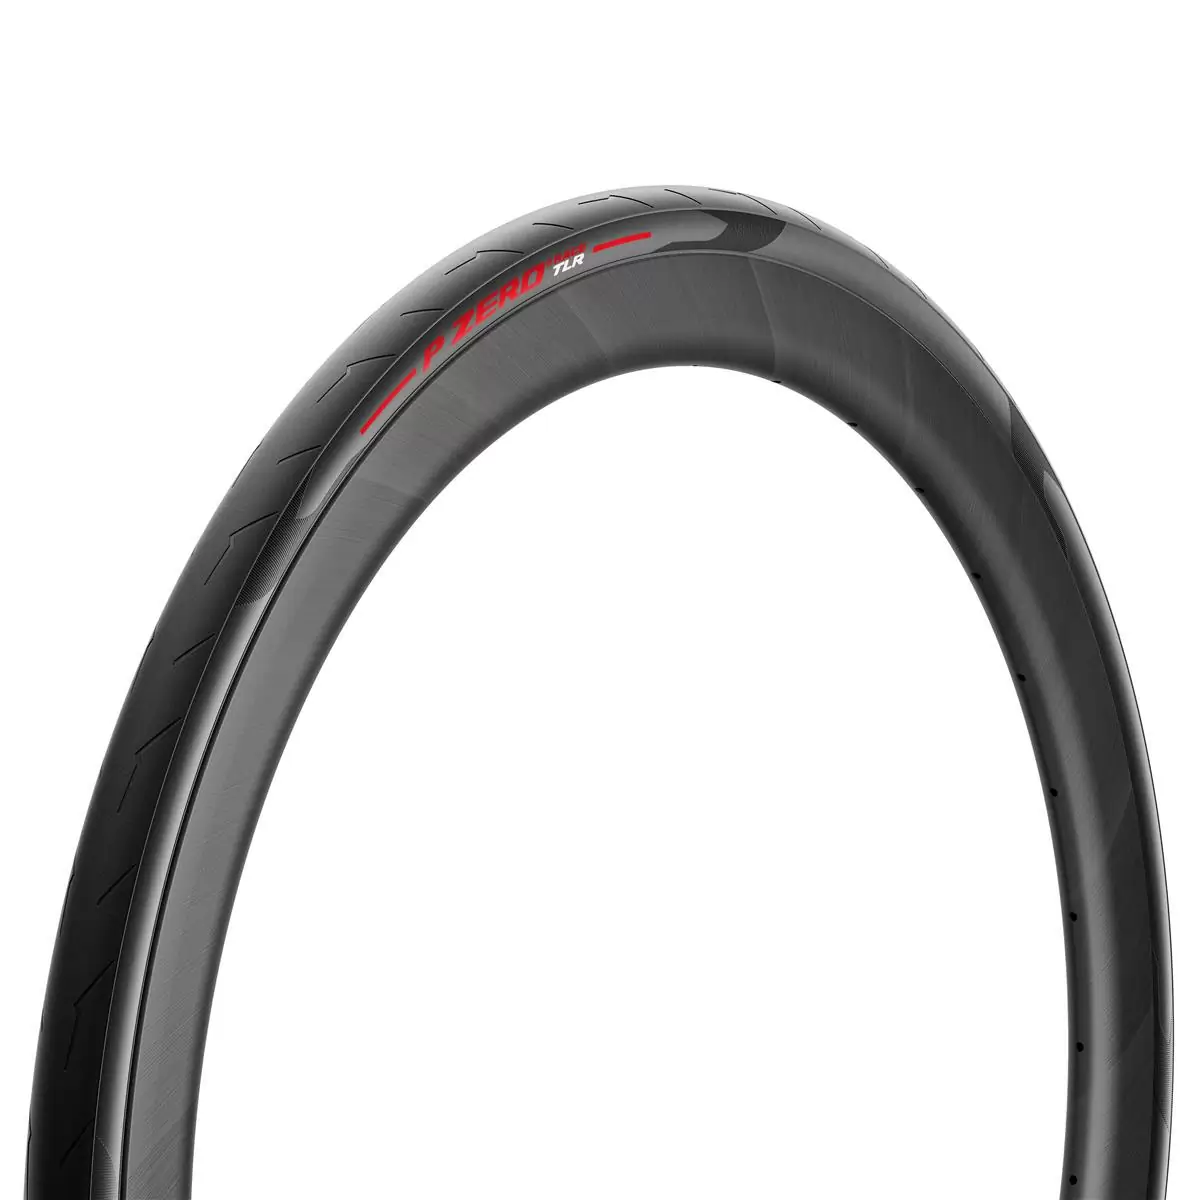 Tire P ZERO Race TLR 700x28c Tubeless Ready Red - image